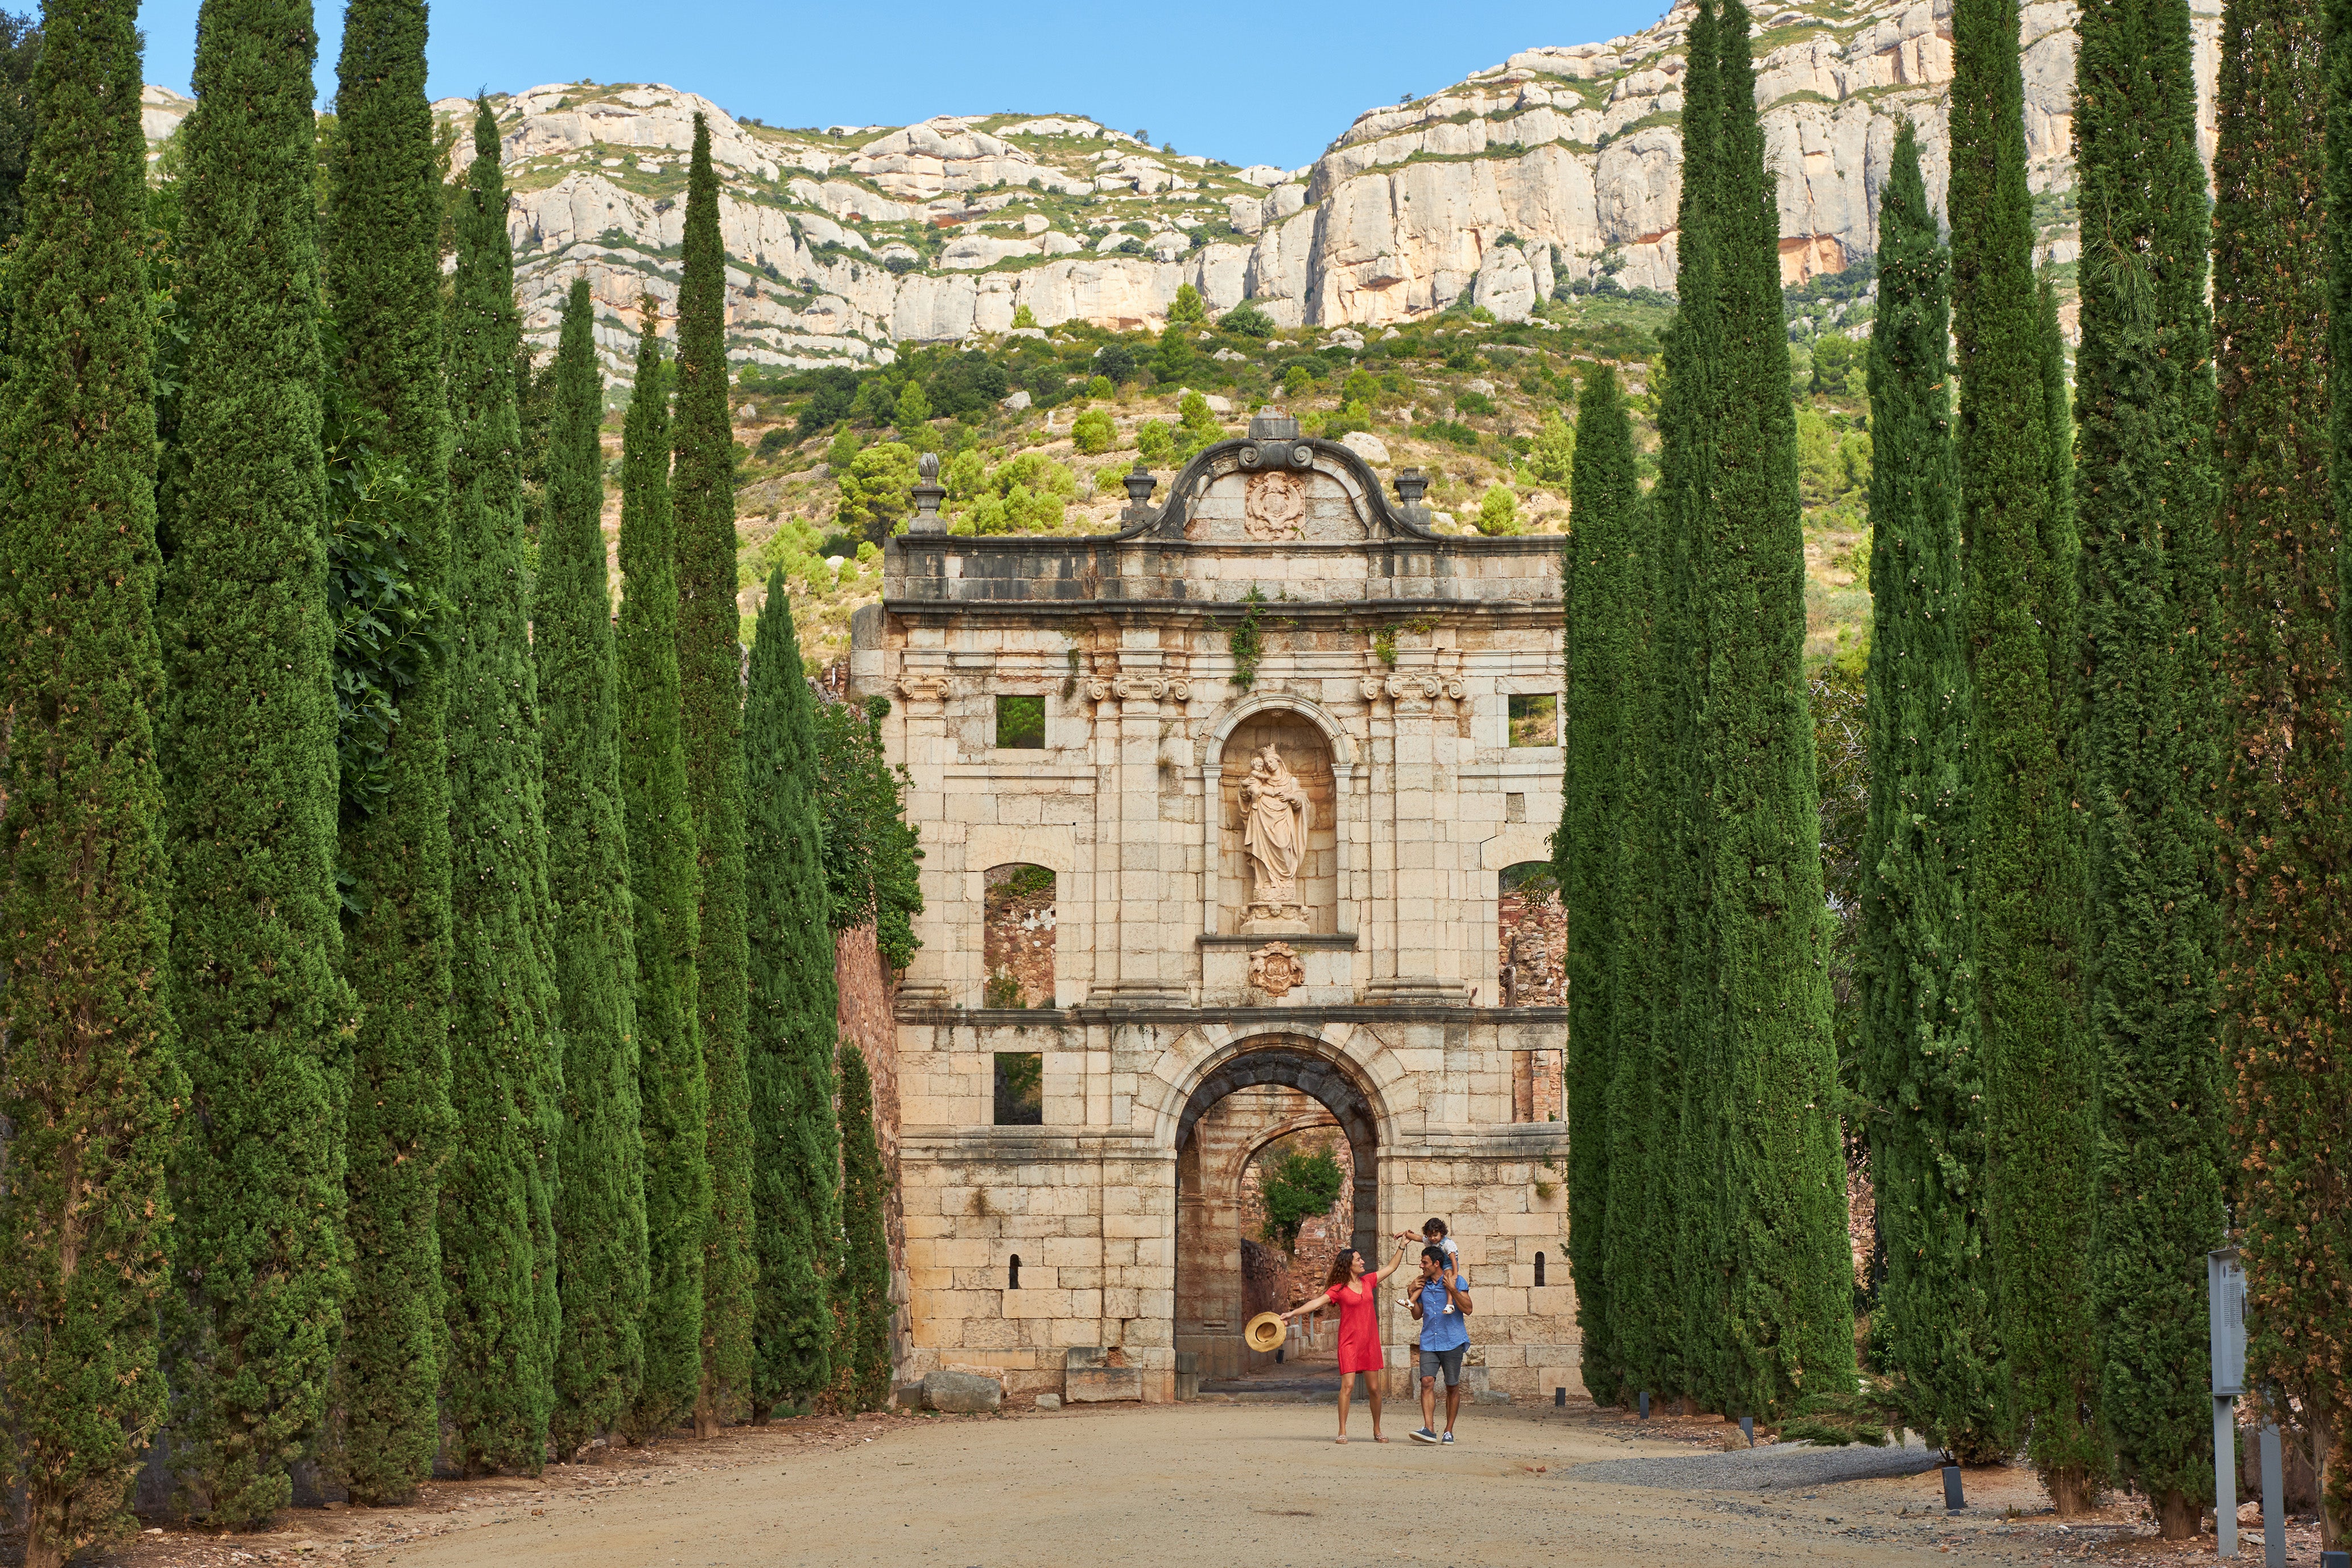 Cultural gems like the Carthusian Monastery in Tarragona are everywhere in Costa Dorada. You just need to know where to look